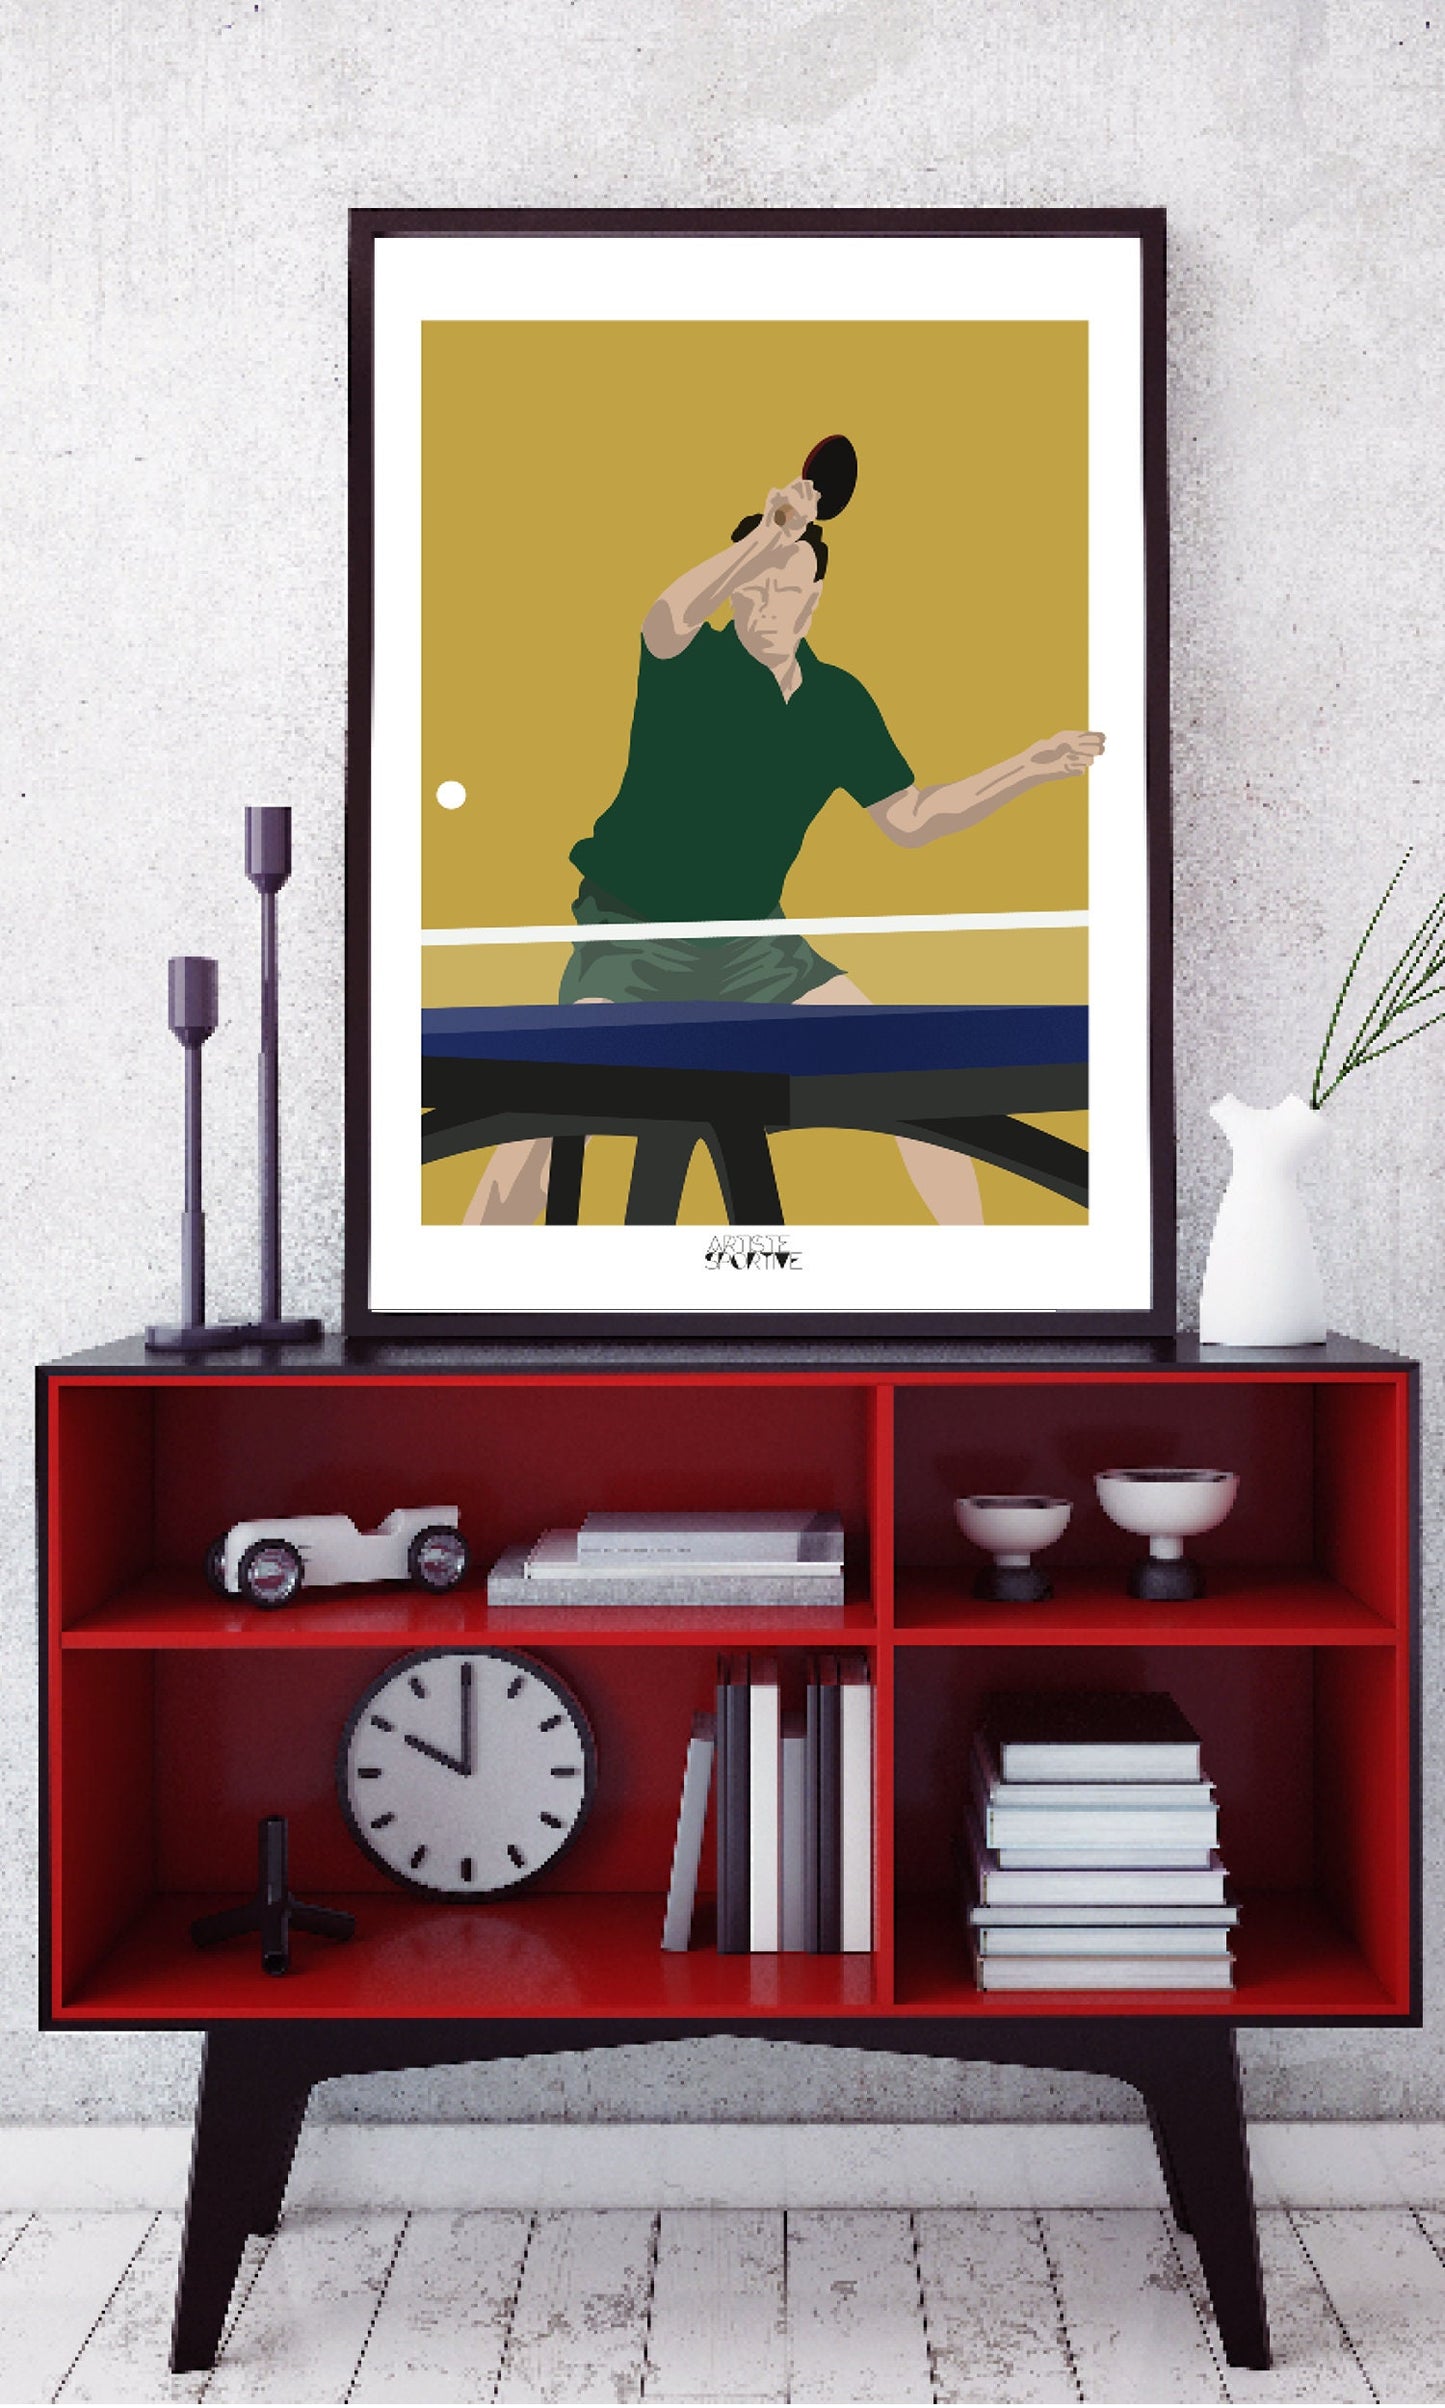 Ping Pong Poster "The table tennis player"